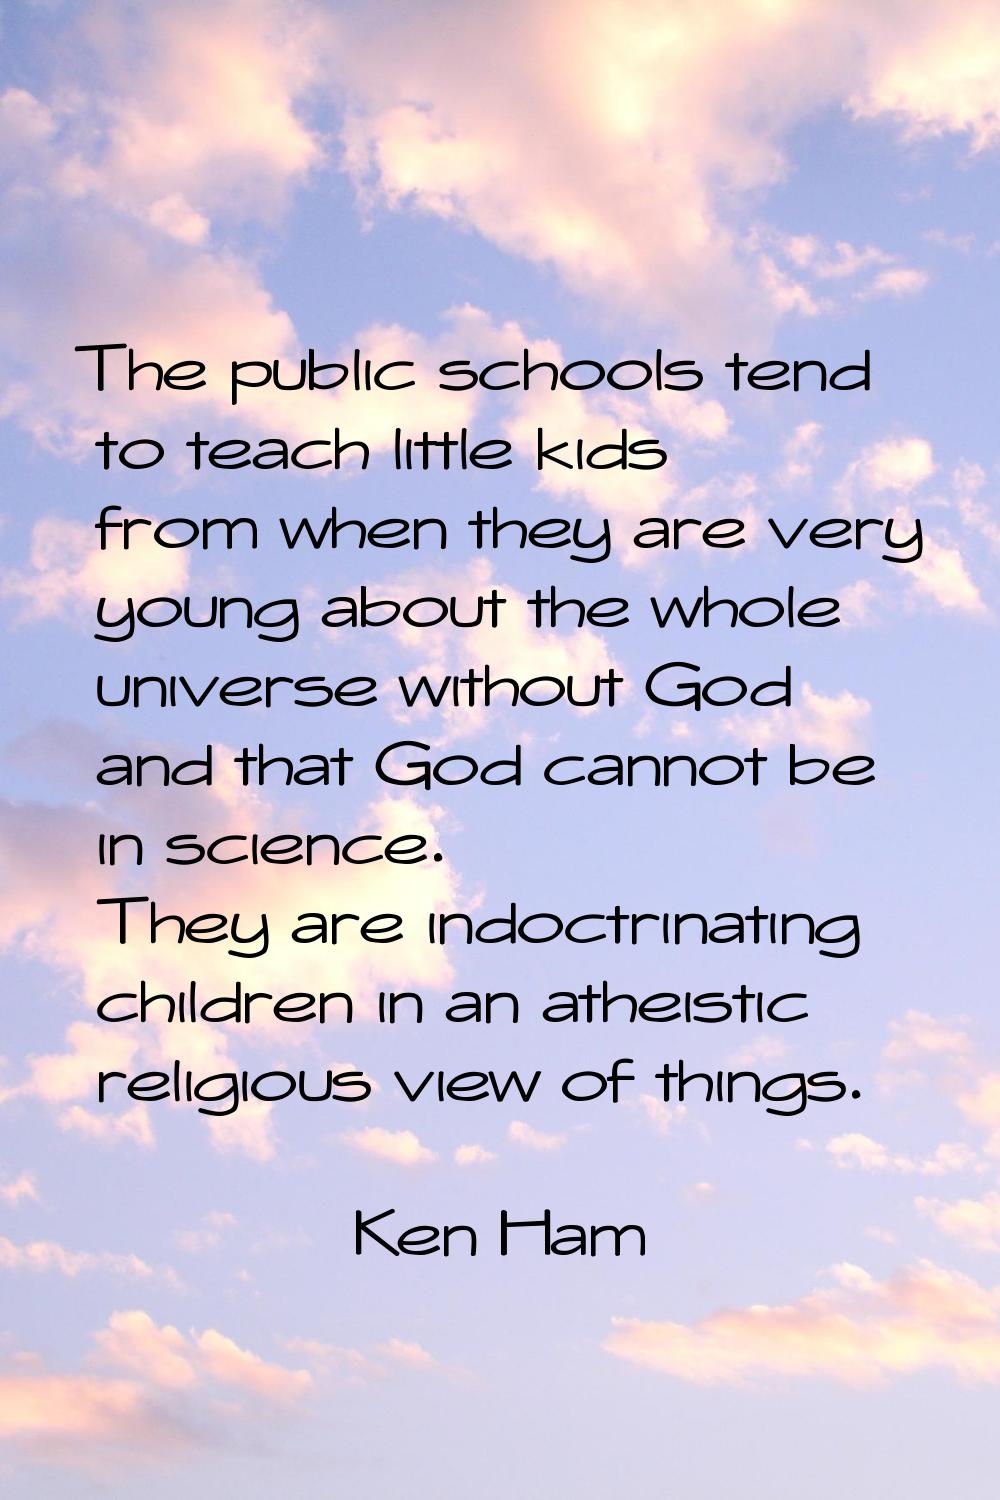 The public schools tend to teach little kids from when they are very young about the whole universe